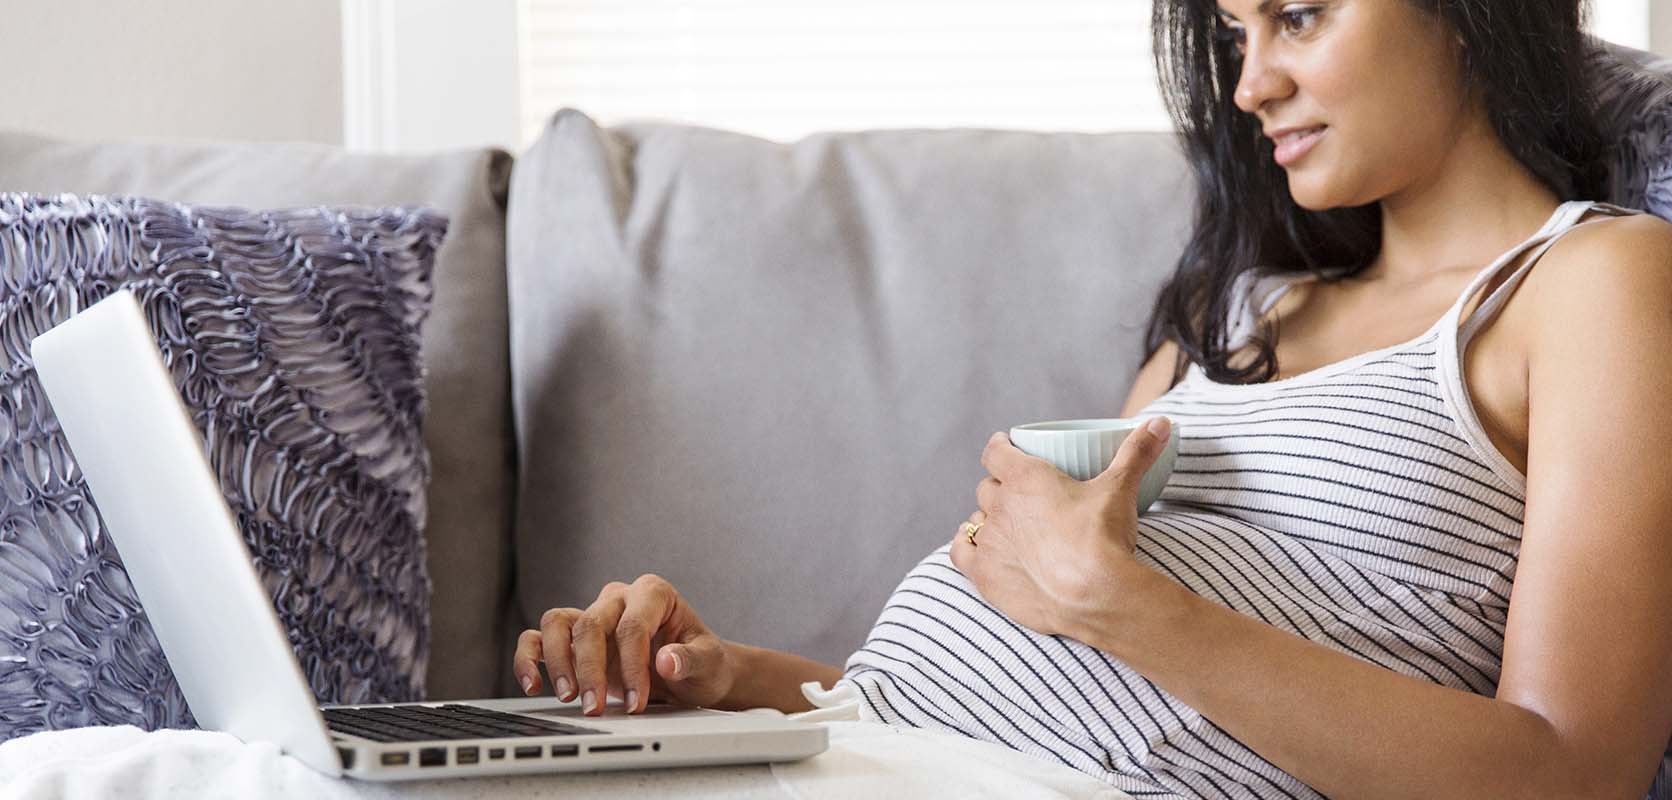 Pregnant woman on laptop searching if smoking marijuana while pregnant will harm the baby.